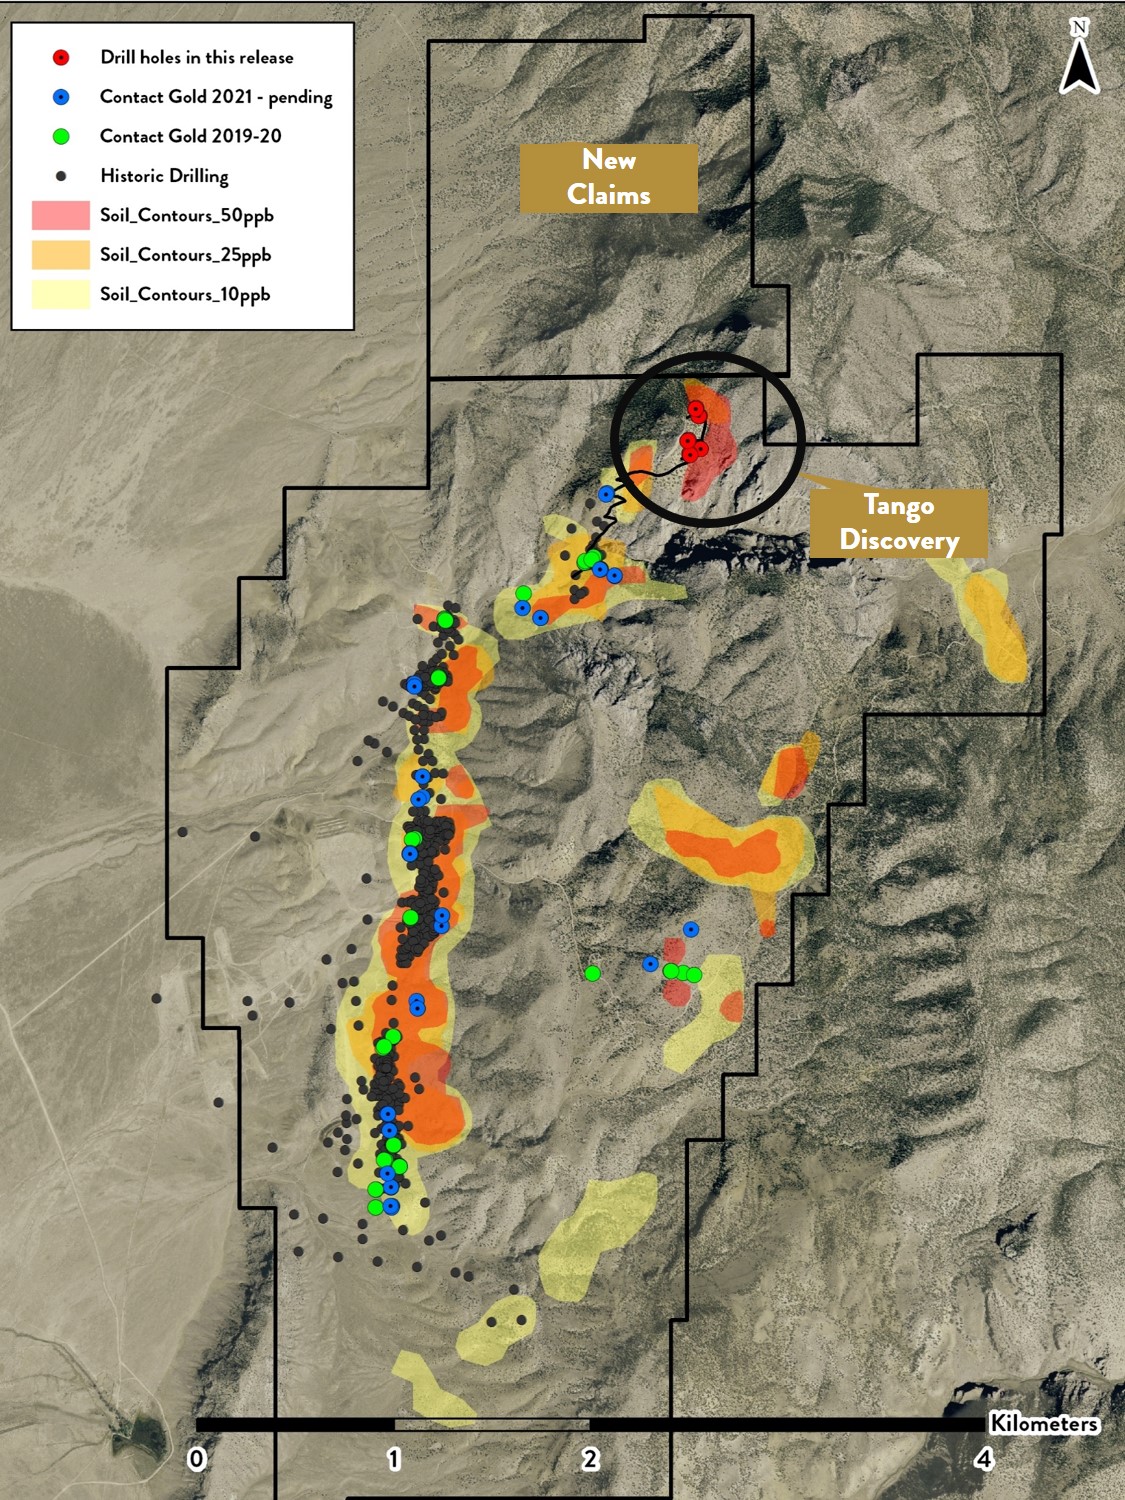 Contact Gold Makes Major Gold Discovery at the Green Springs Project, Nevada, Drills 54 metres …